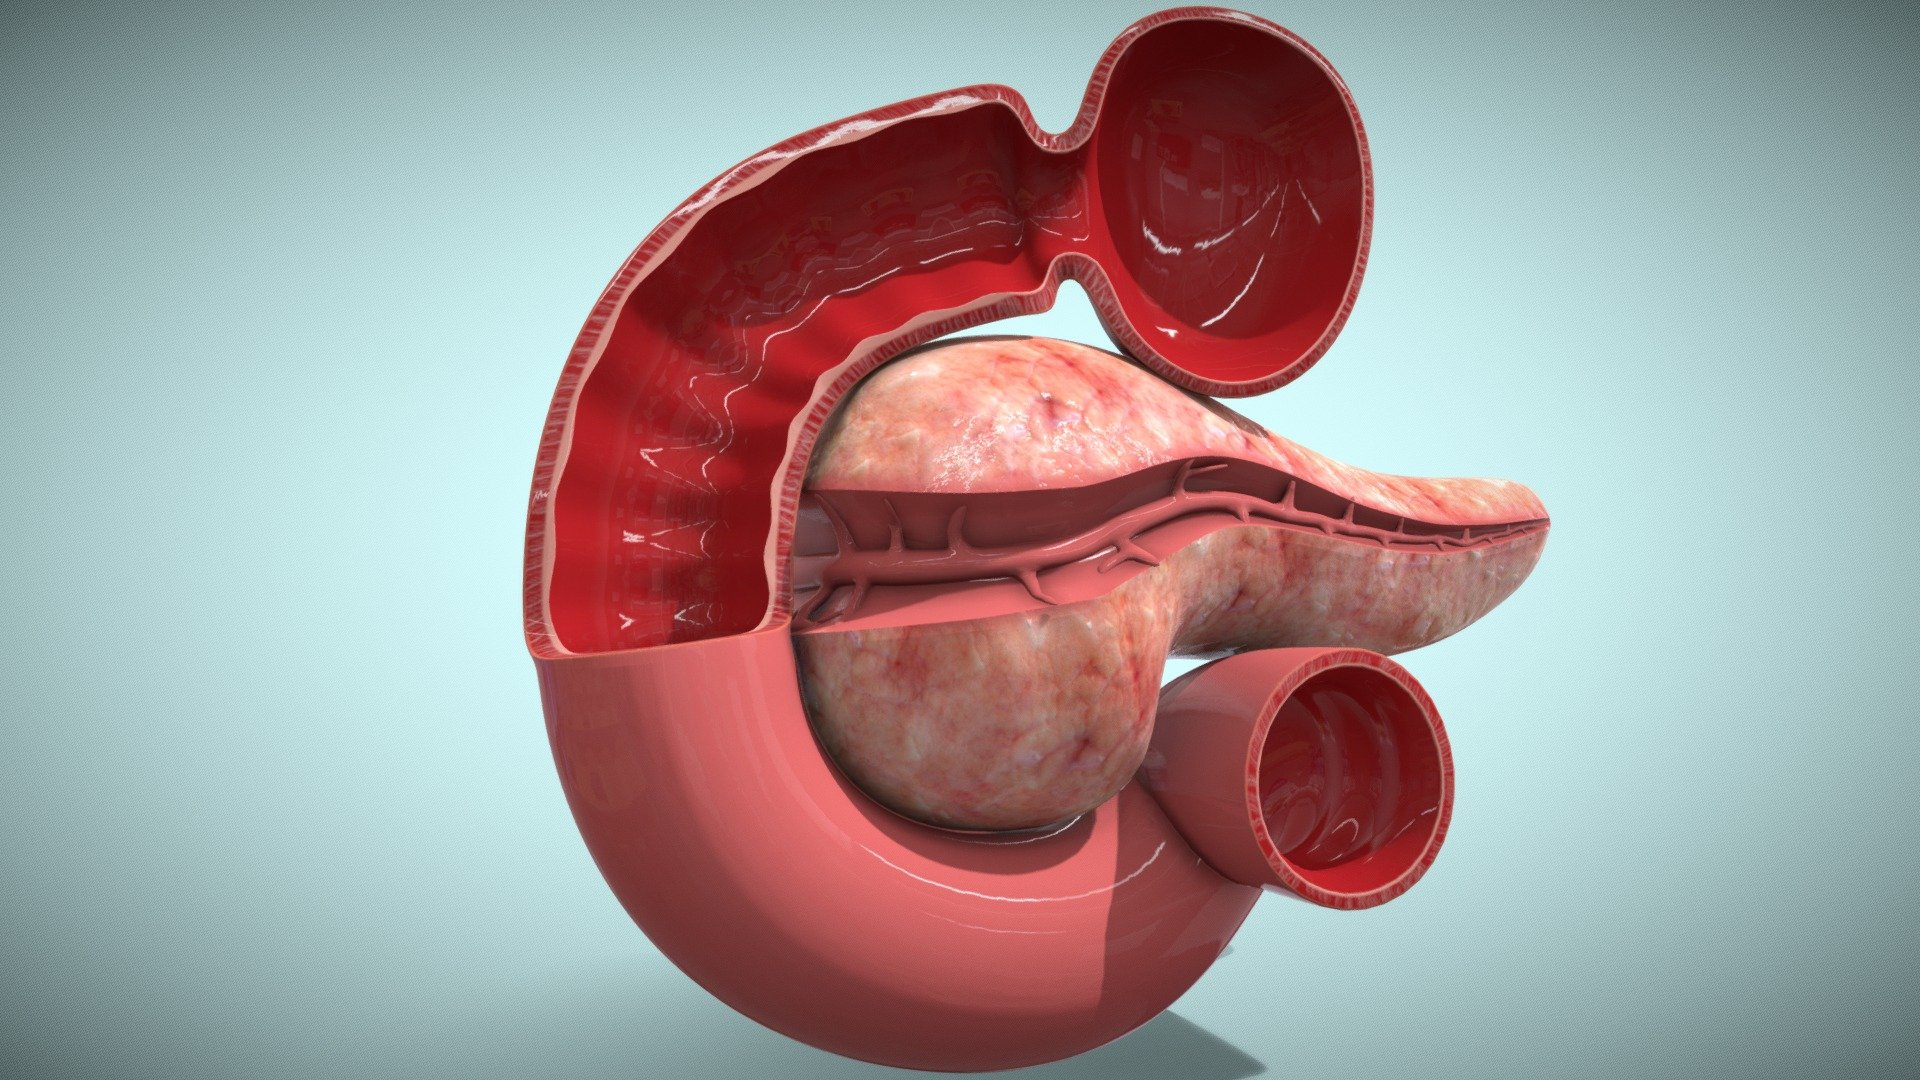 The pancreas (meaning all flesh) lies in the upper abdomen behind the stomach. The pancreas is part of the gastrointestinal system that makes and secretes digestive enzymes into the intestine, and also an endocrine organ that makes and secretes hormones into the blood to control energy metabolism and storage throughout the body 3d model